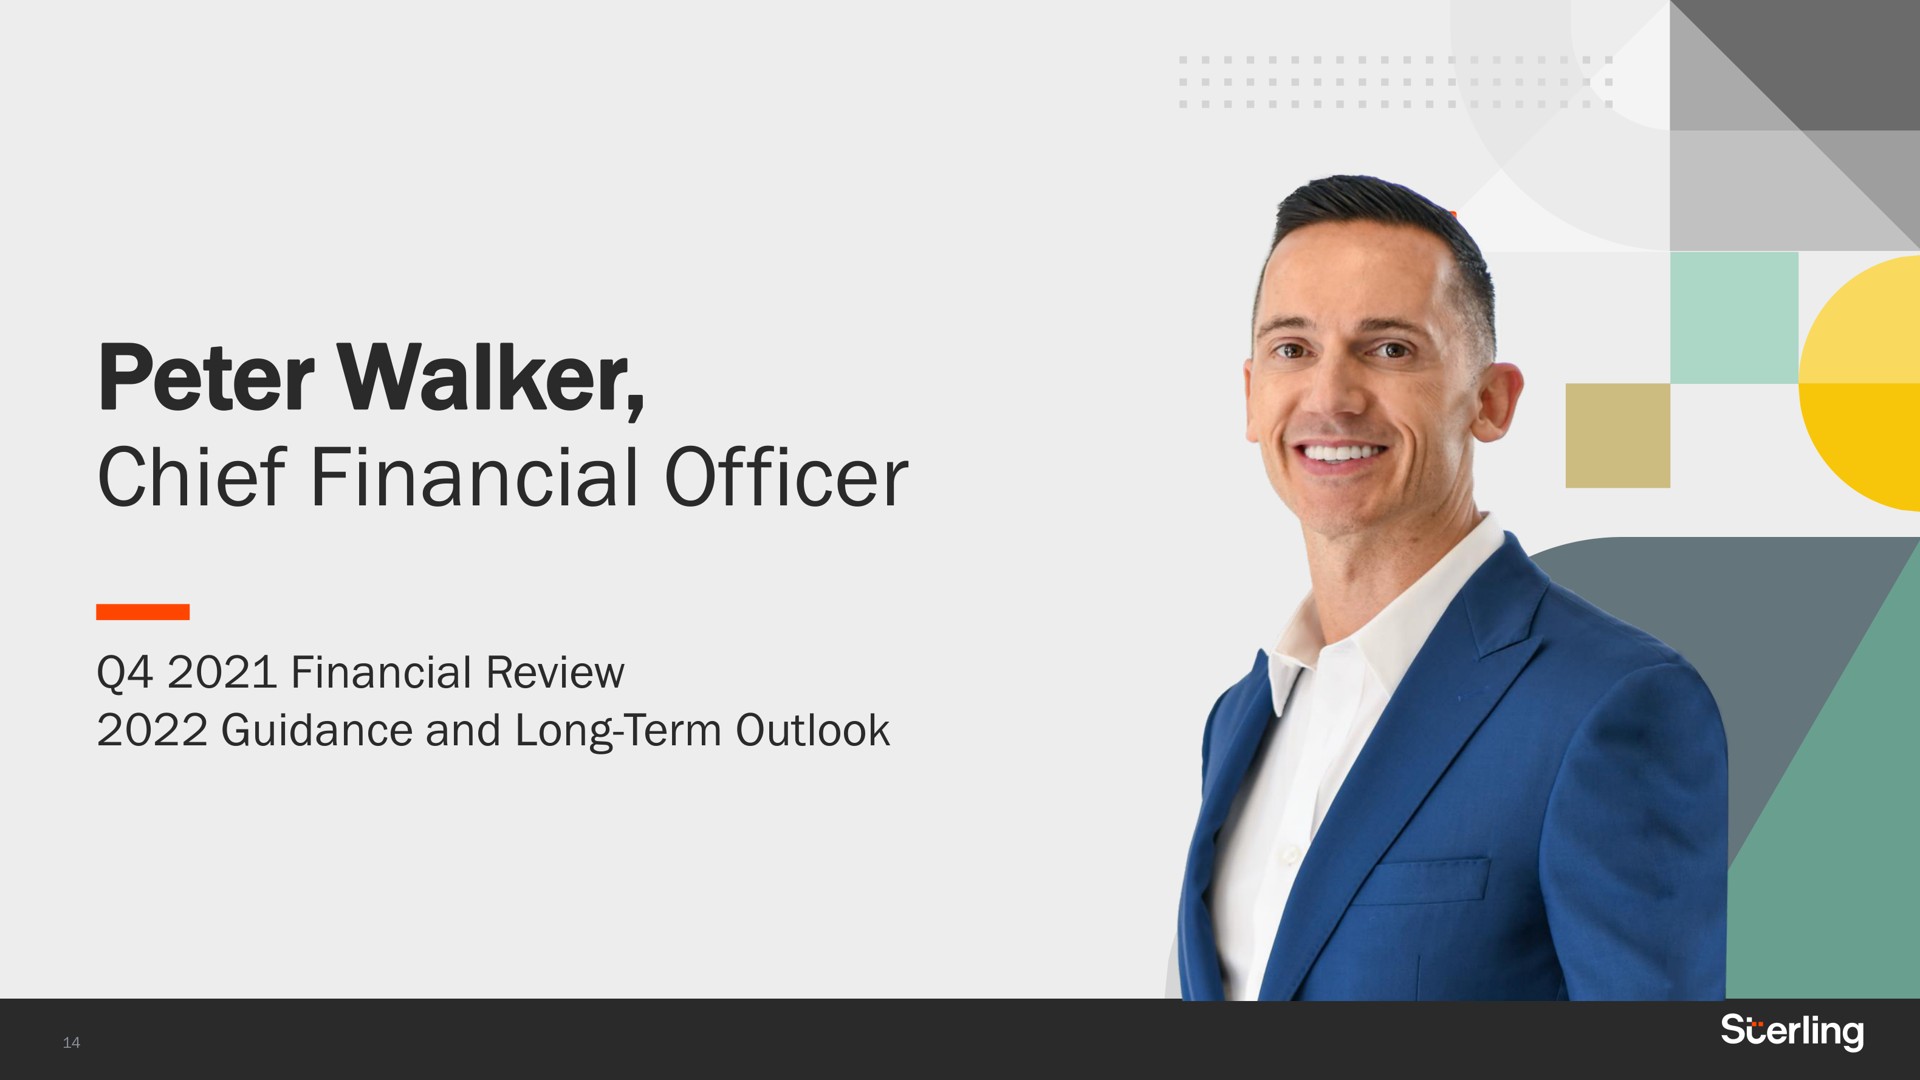 peter walker chief financial officer financial review guidance and long term outlook | Sterling